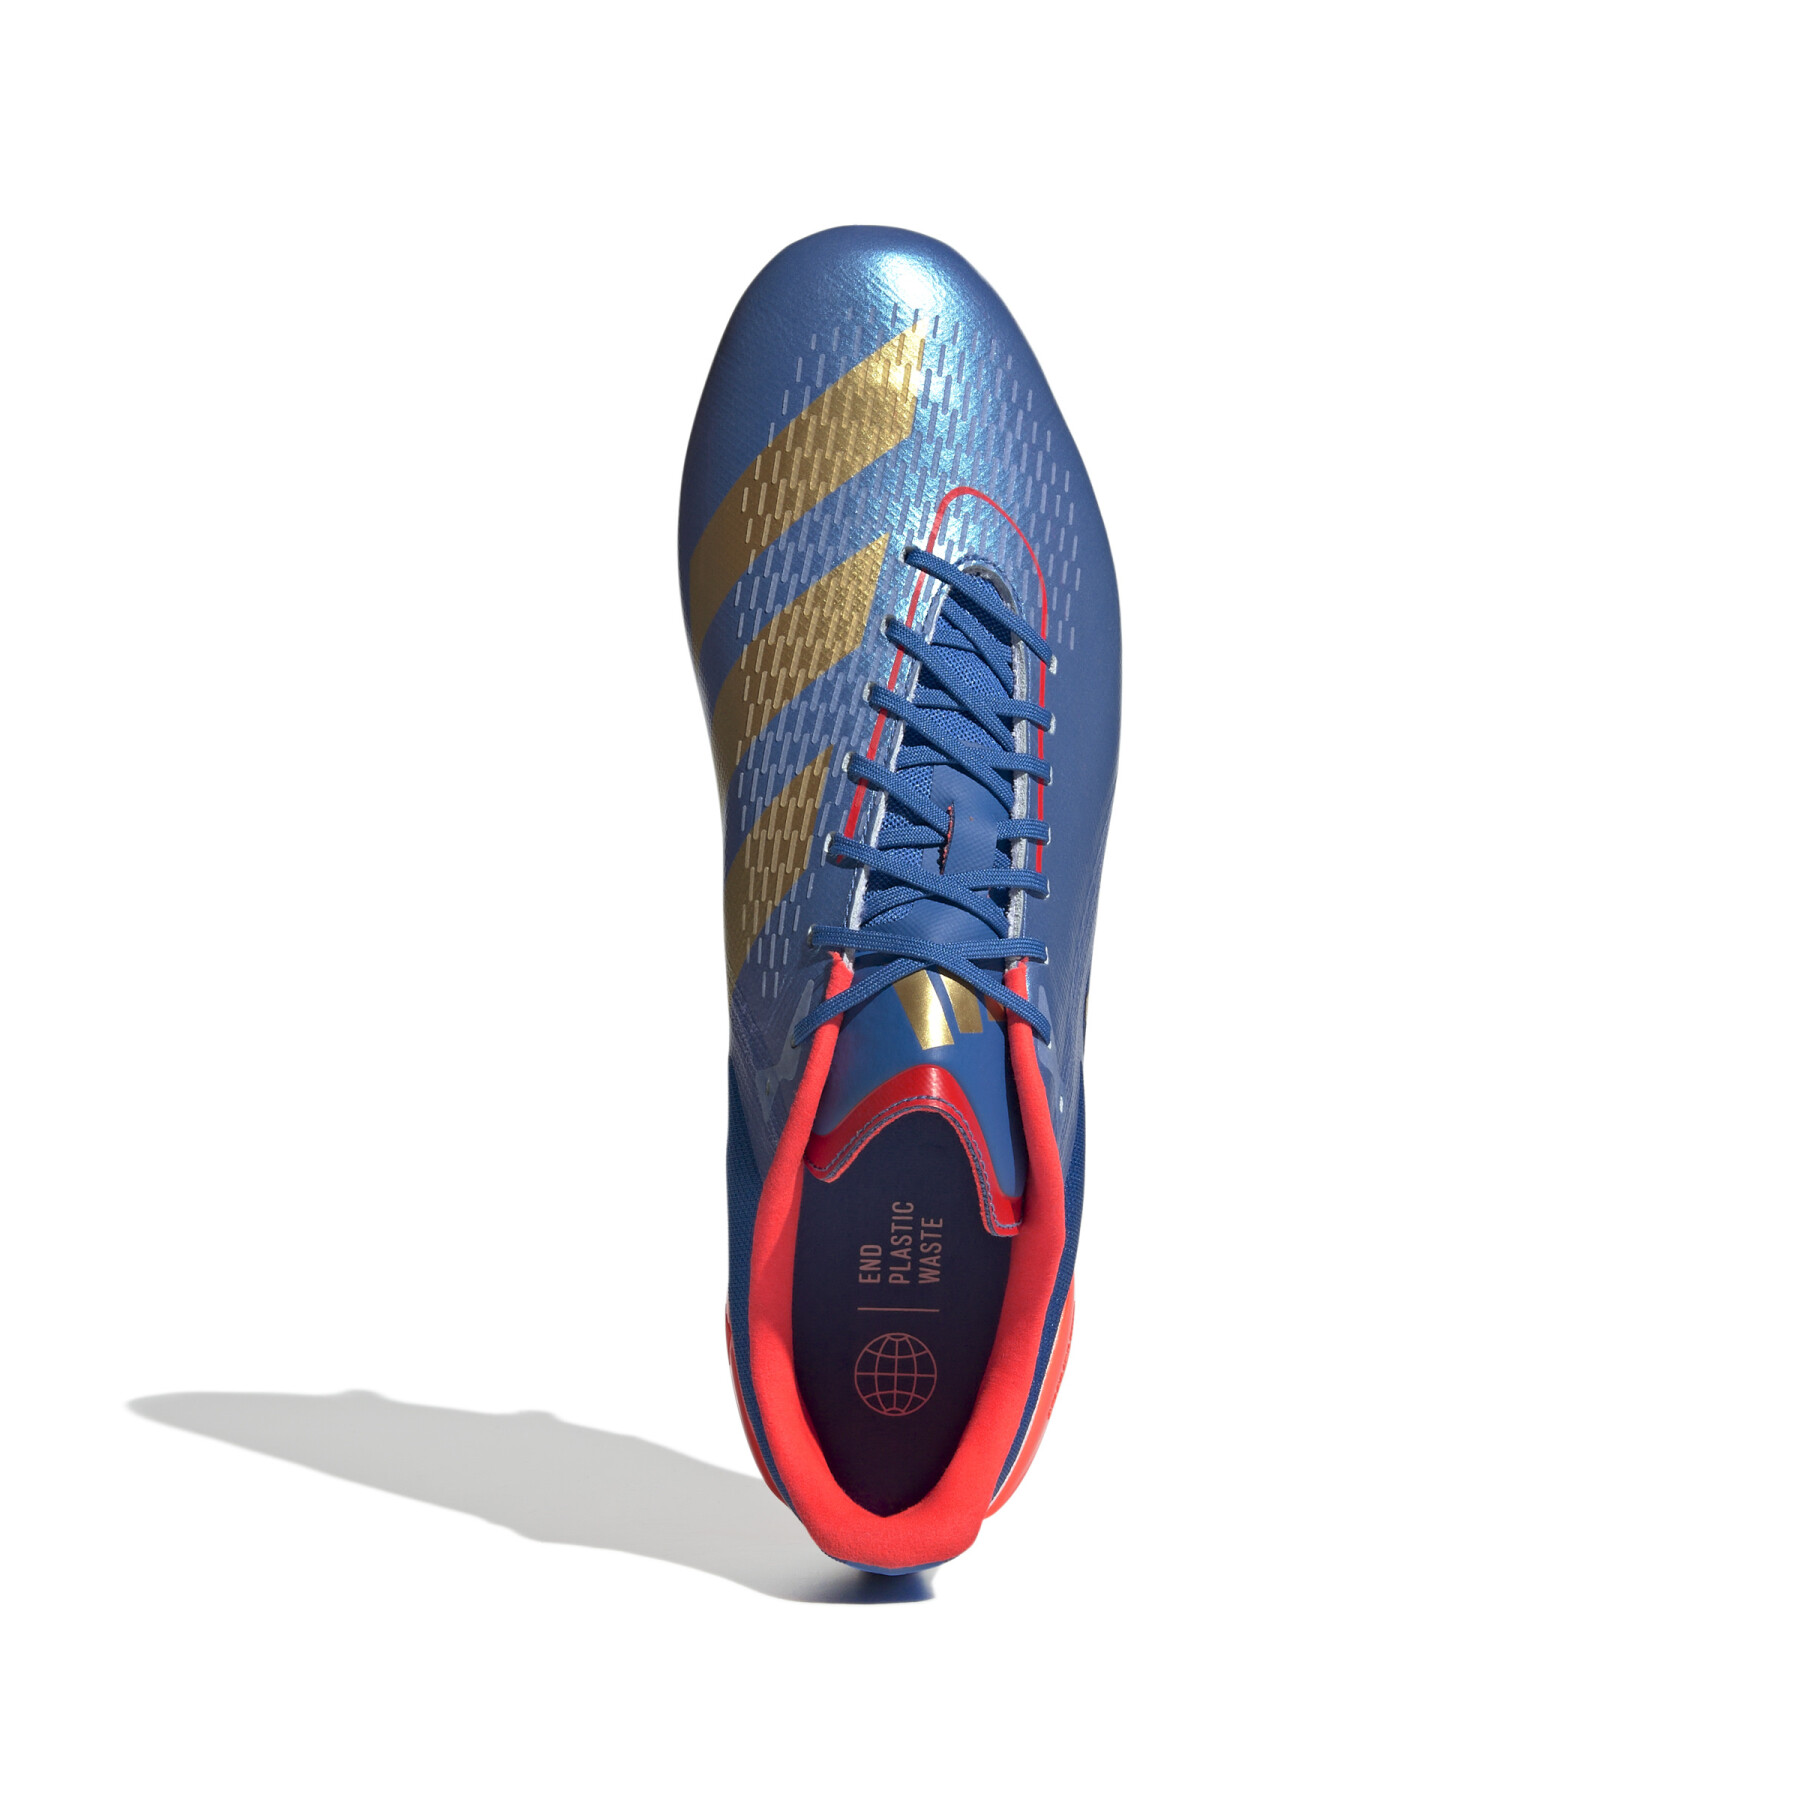 Chaussures de rugby adidas Adizero RS15 Pro SG